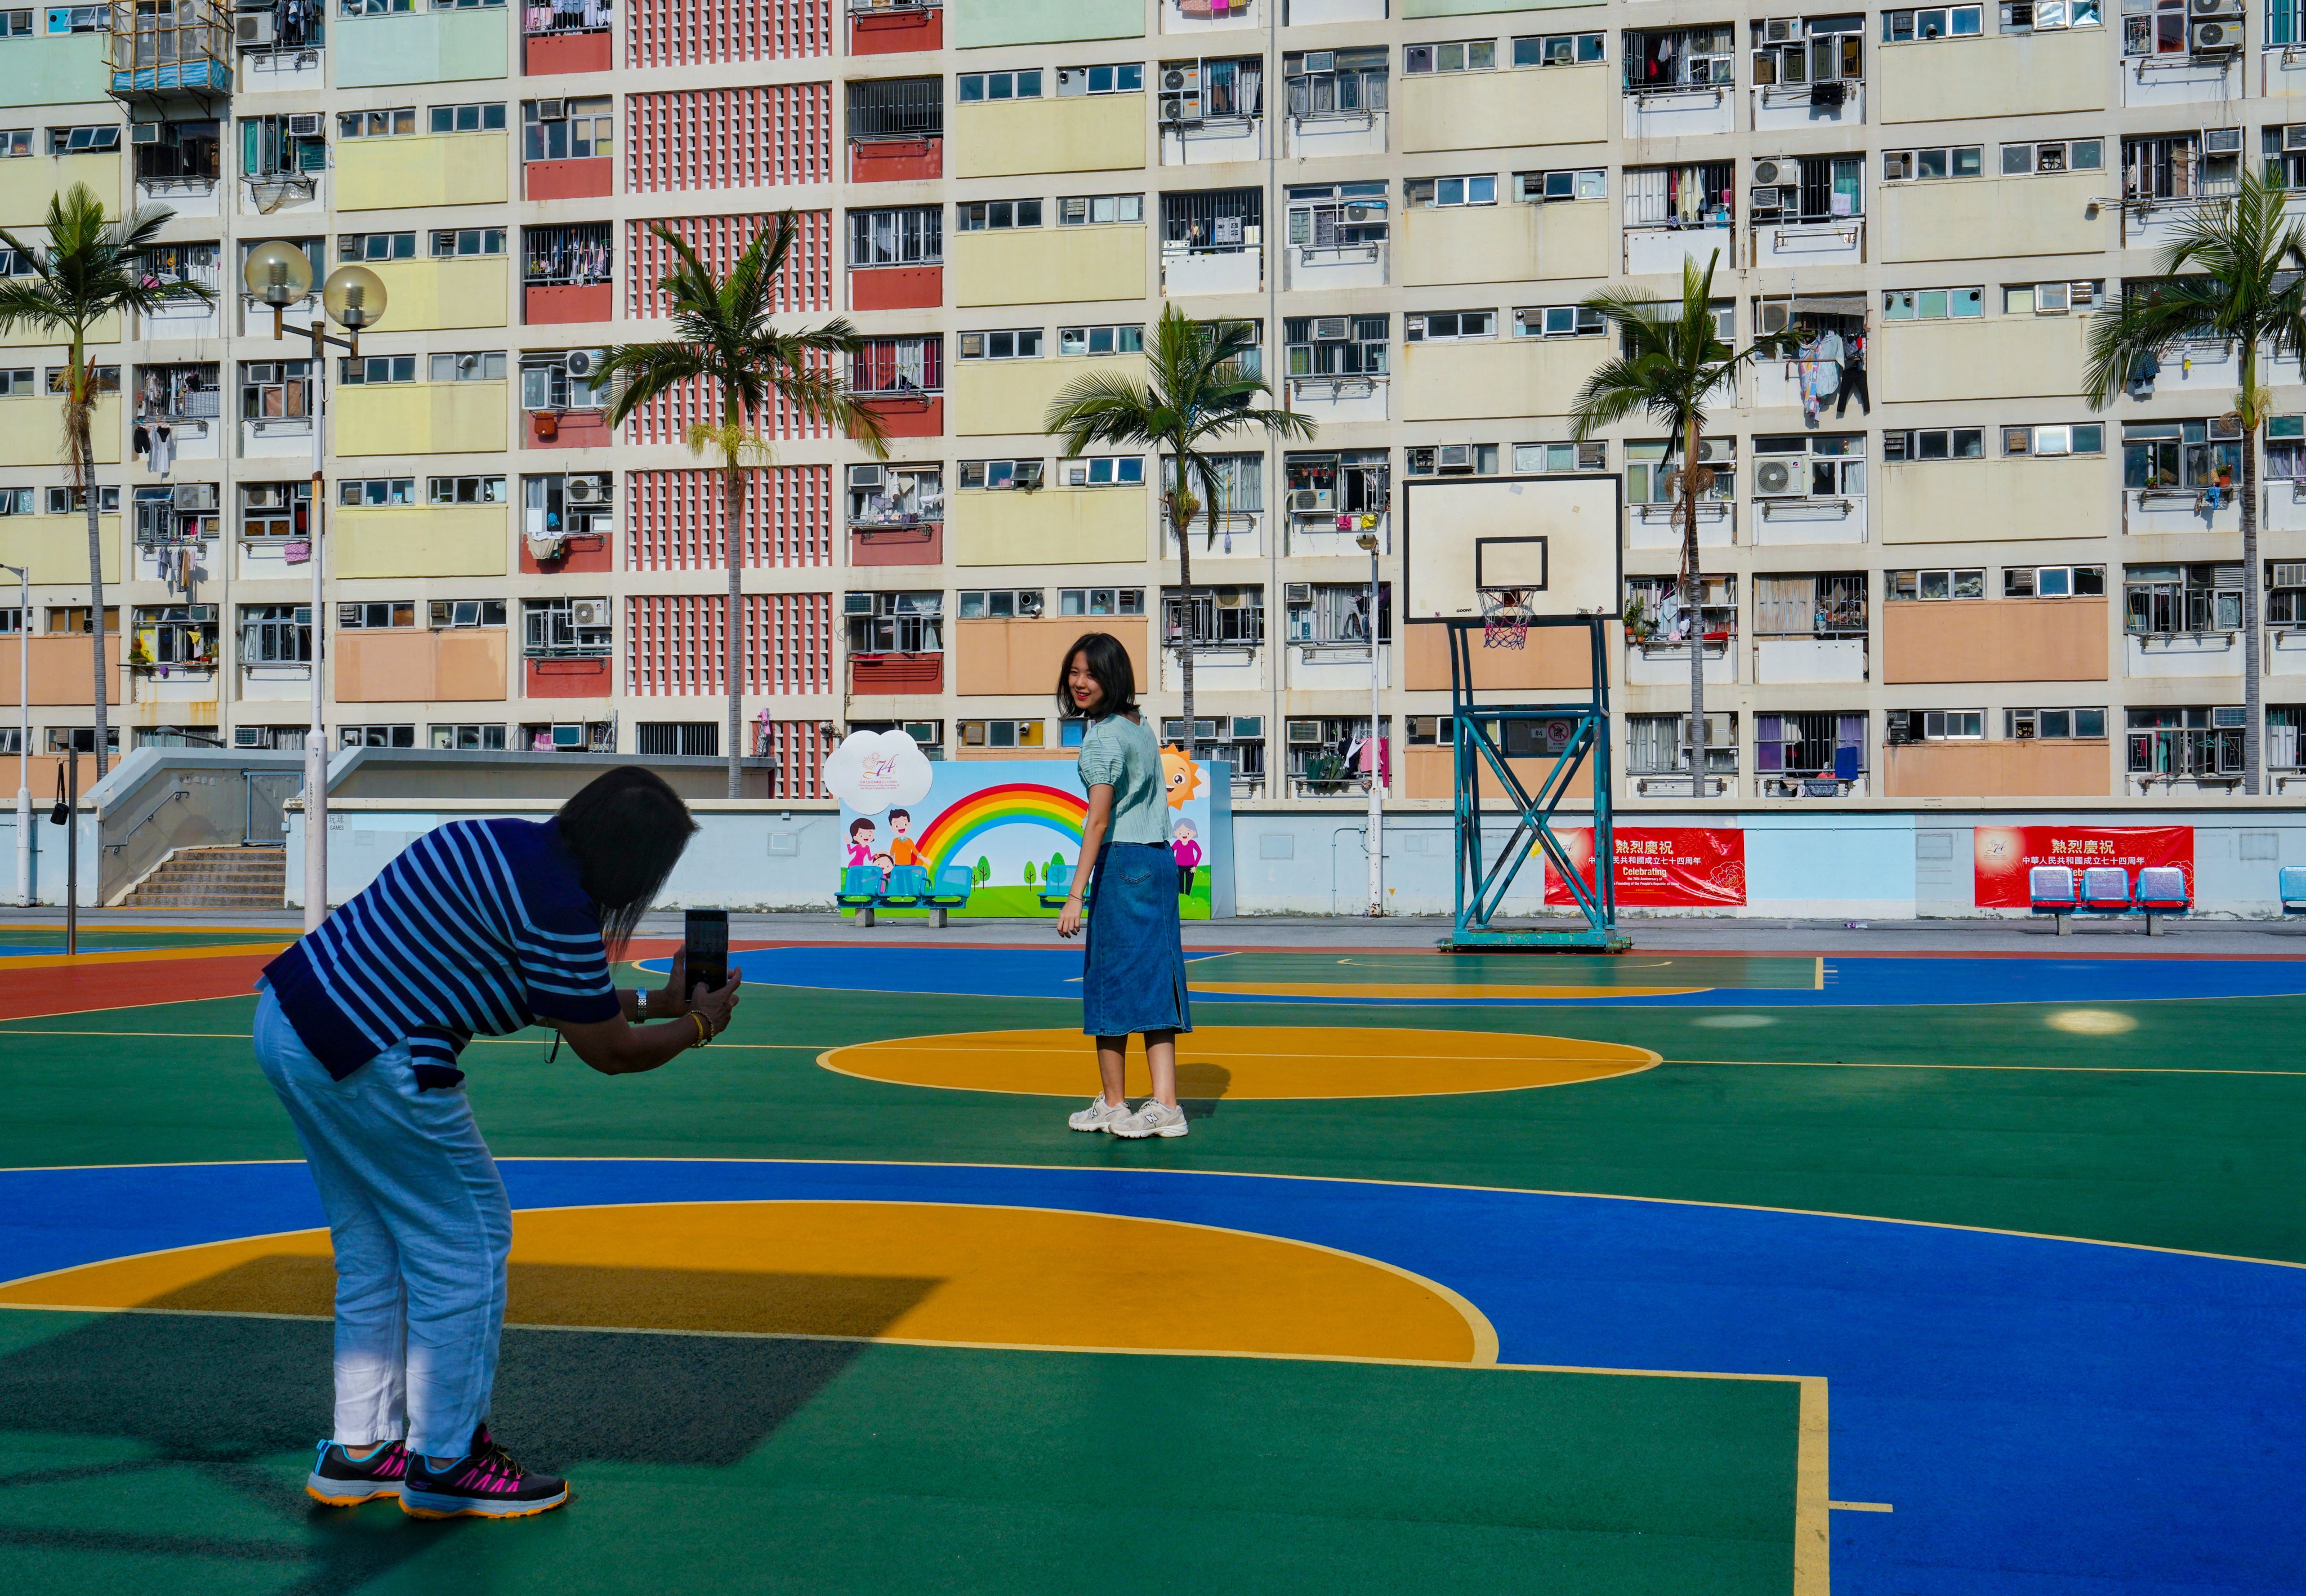 People take photos at Choi Hung Estate on November 6. The Housing Authority reportedly plans to demolish and rebuild the 60-year-old estate that has become a tourist hotspot. Photo: Elson Li